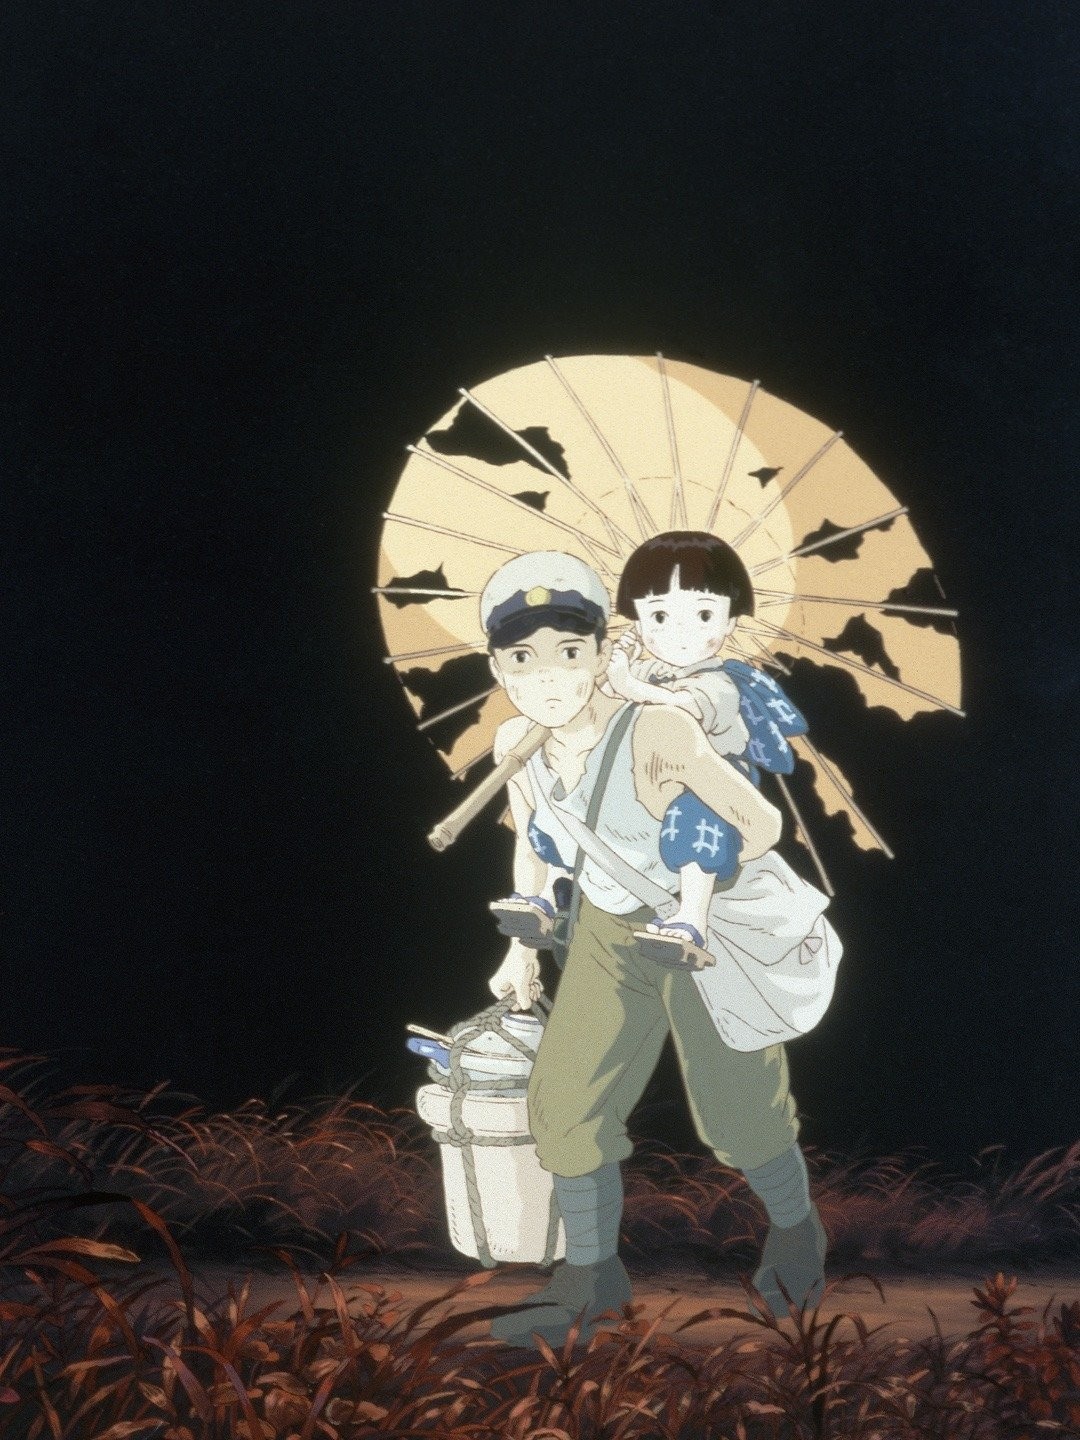 Studio Ghibli fans surprised to find hidden images in Grave of the Fireflies  anime poster | SoraNews24 -Japan News-